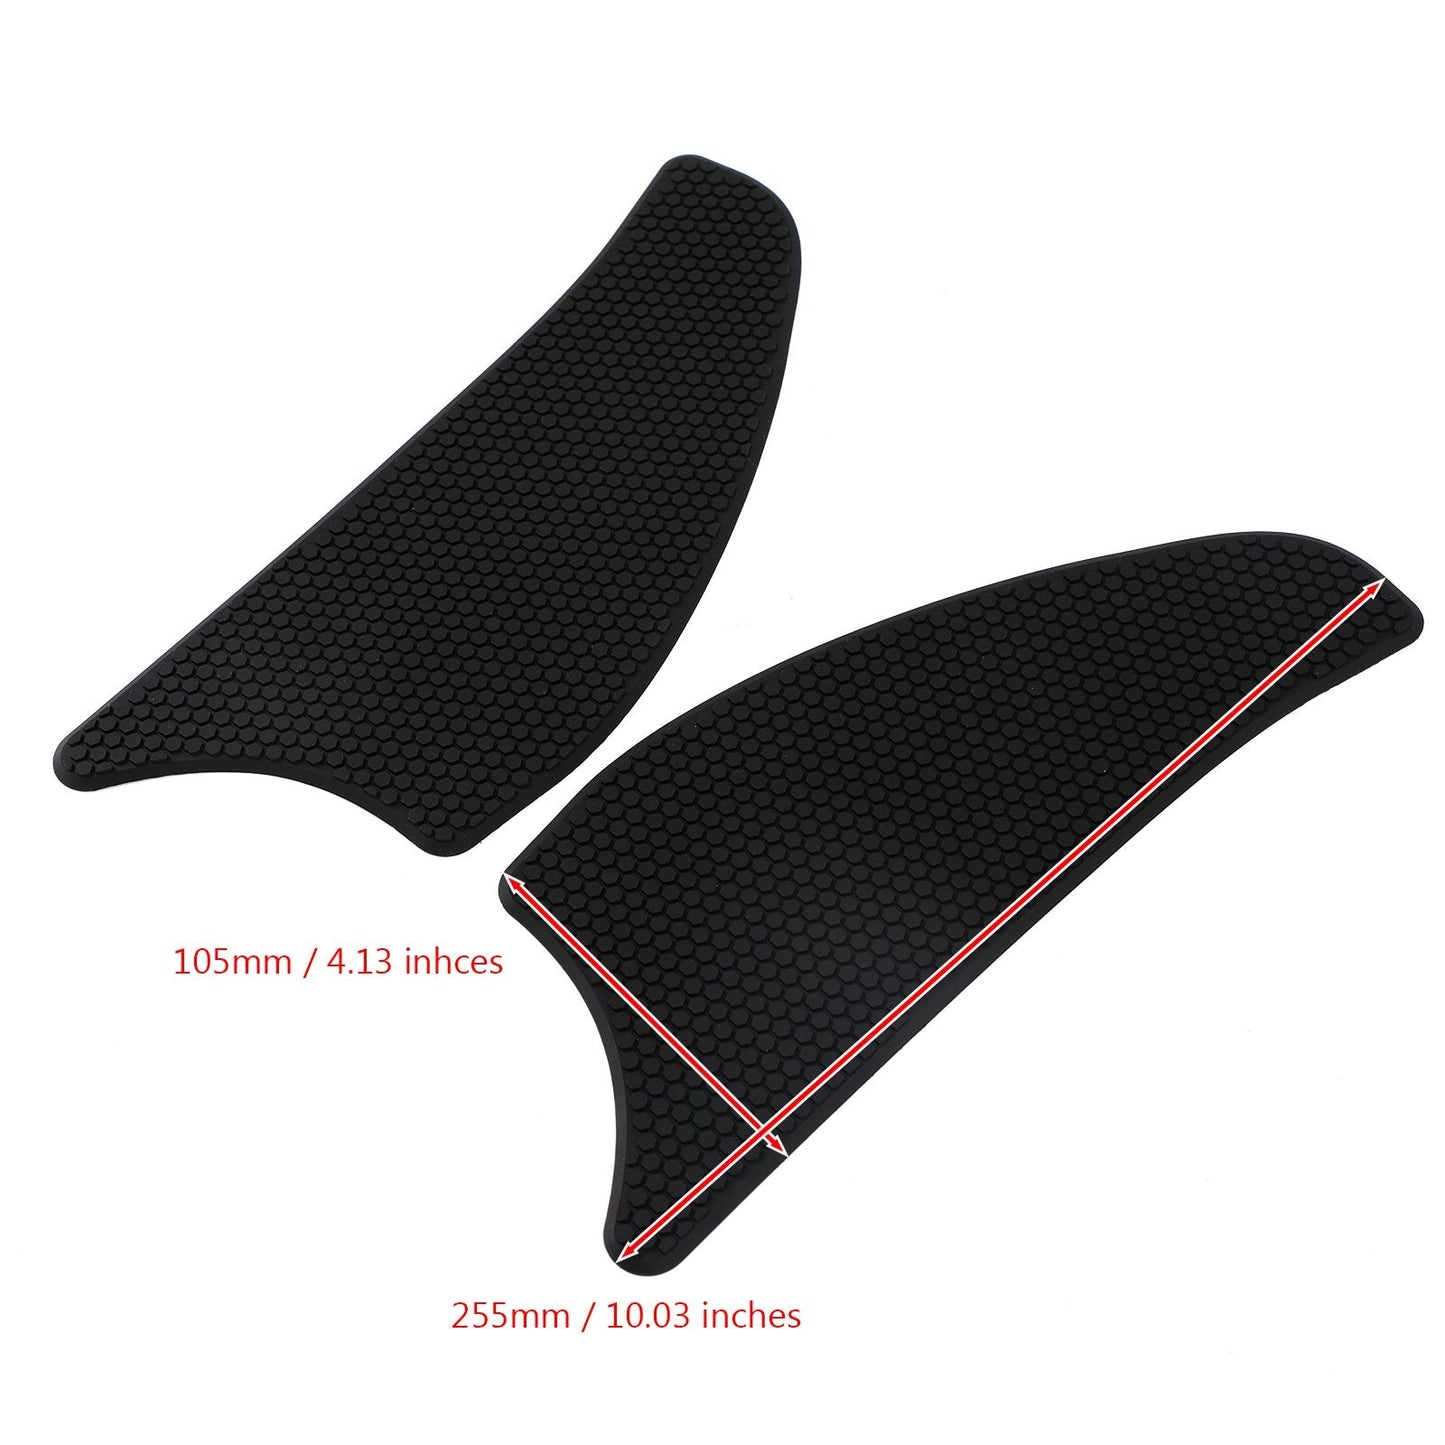 2x Side Tank Traction Grips Pads Fit for Kawasaki Versys 1000 KLZ1000 2015-2019